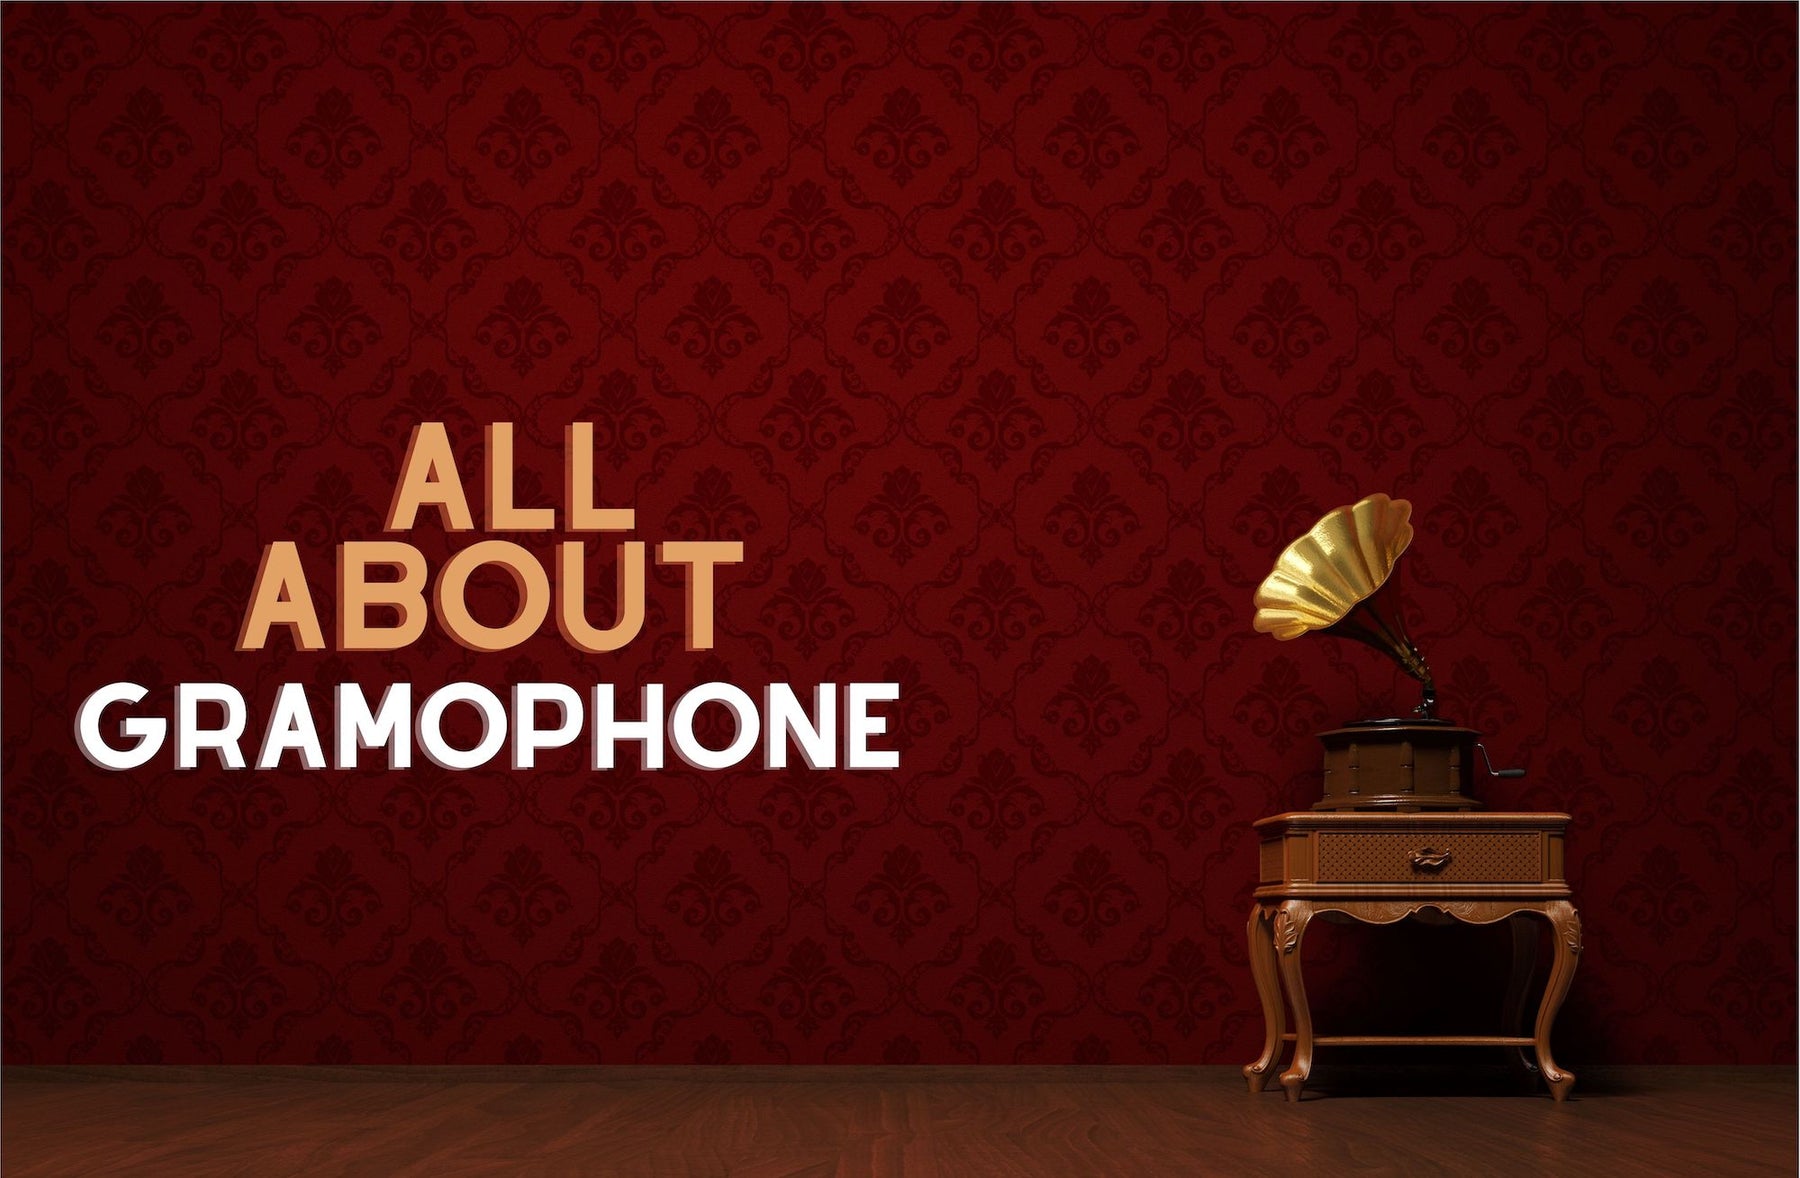 Gramophone - Why Do People Still Love It? - The Handmade Store